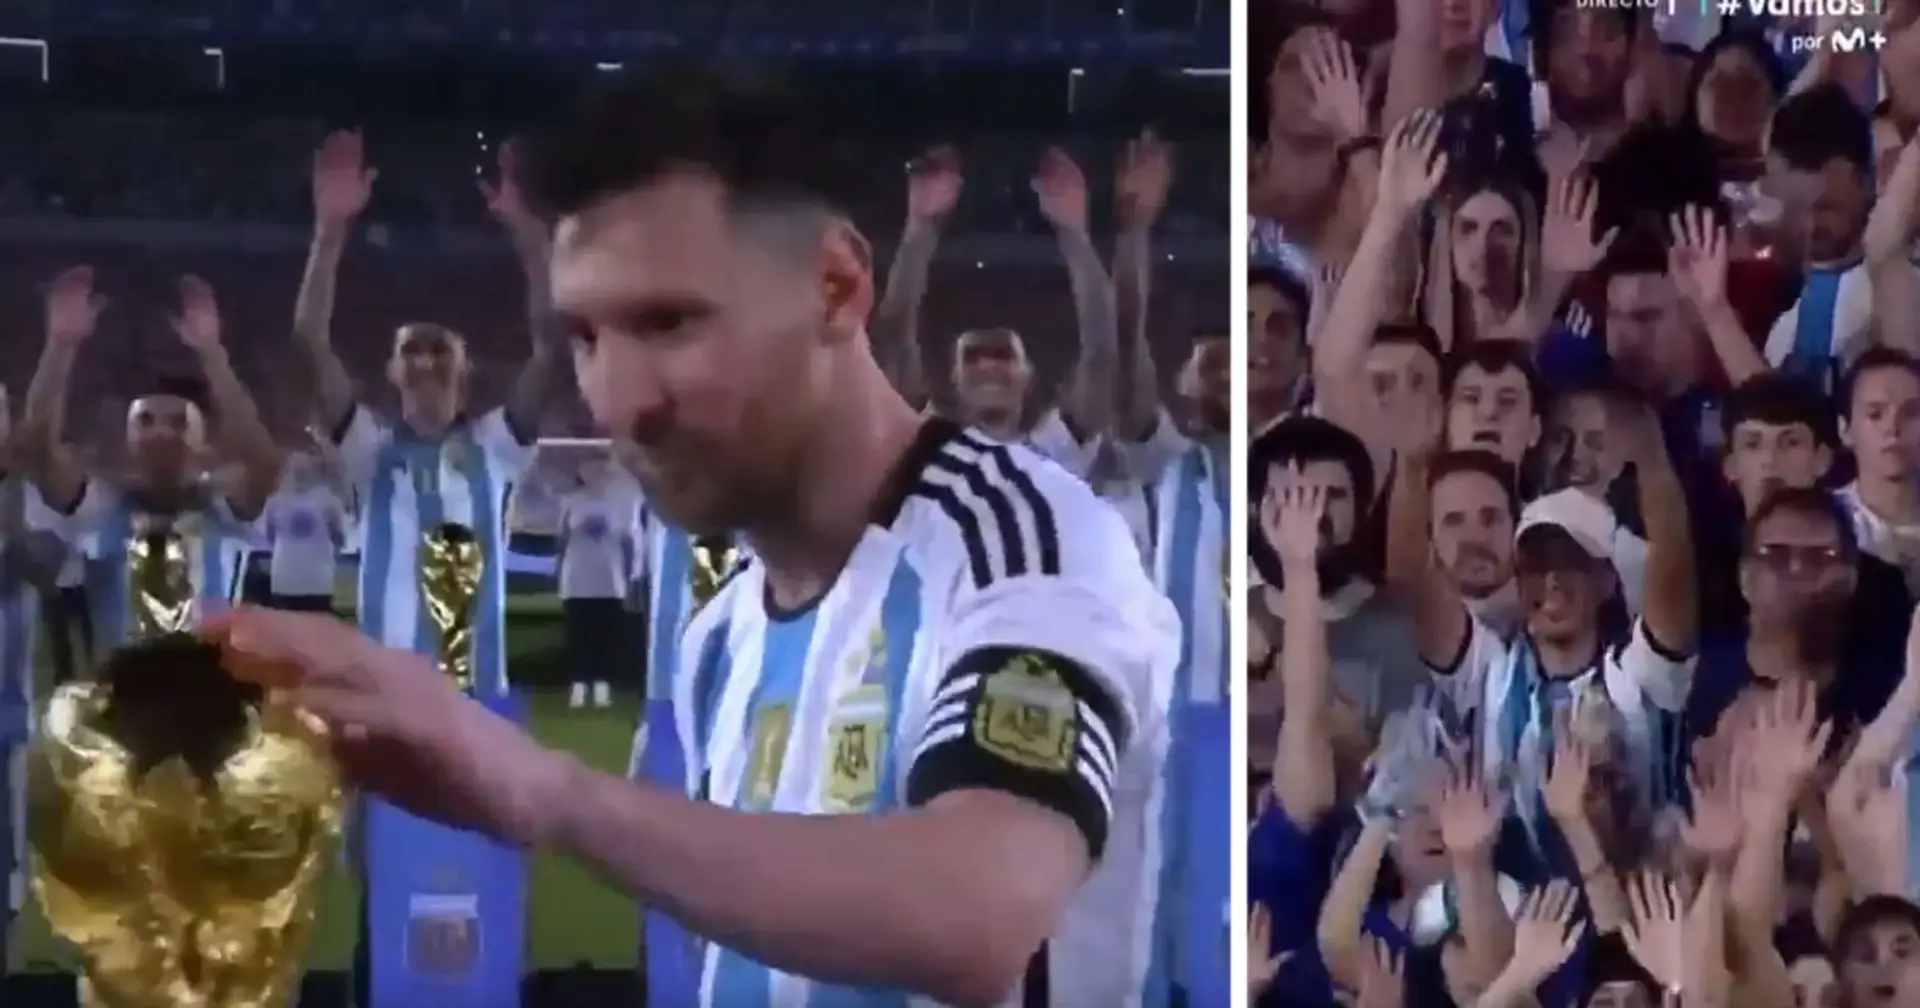 Caught on camera: Messi's reaction to full 83,000 stadium chanting his name as he presents World Cup trophy